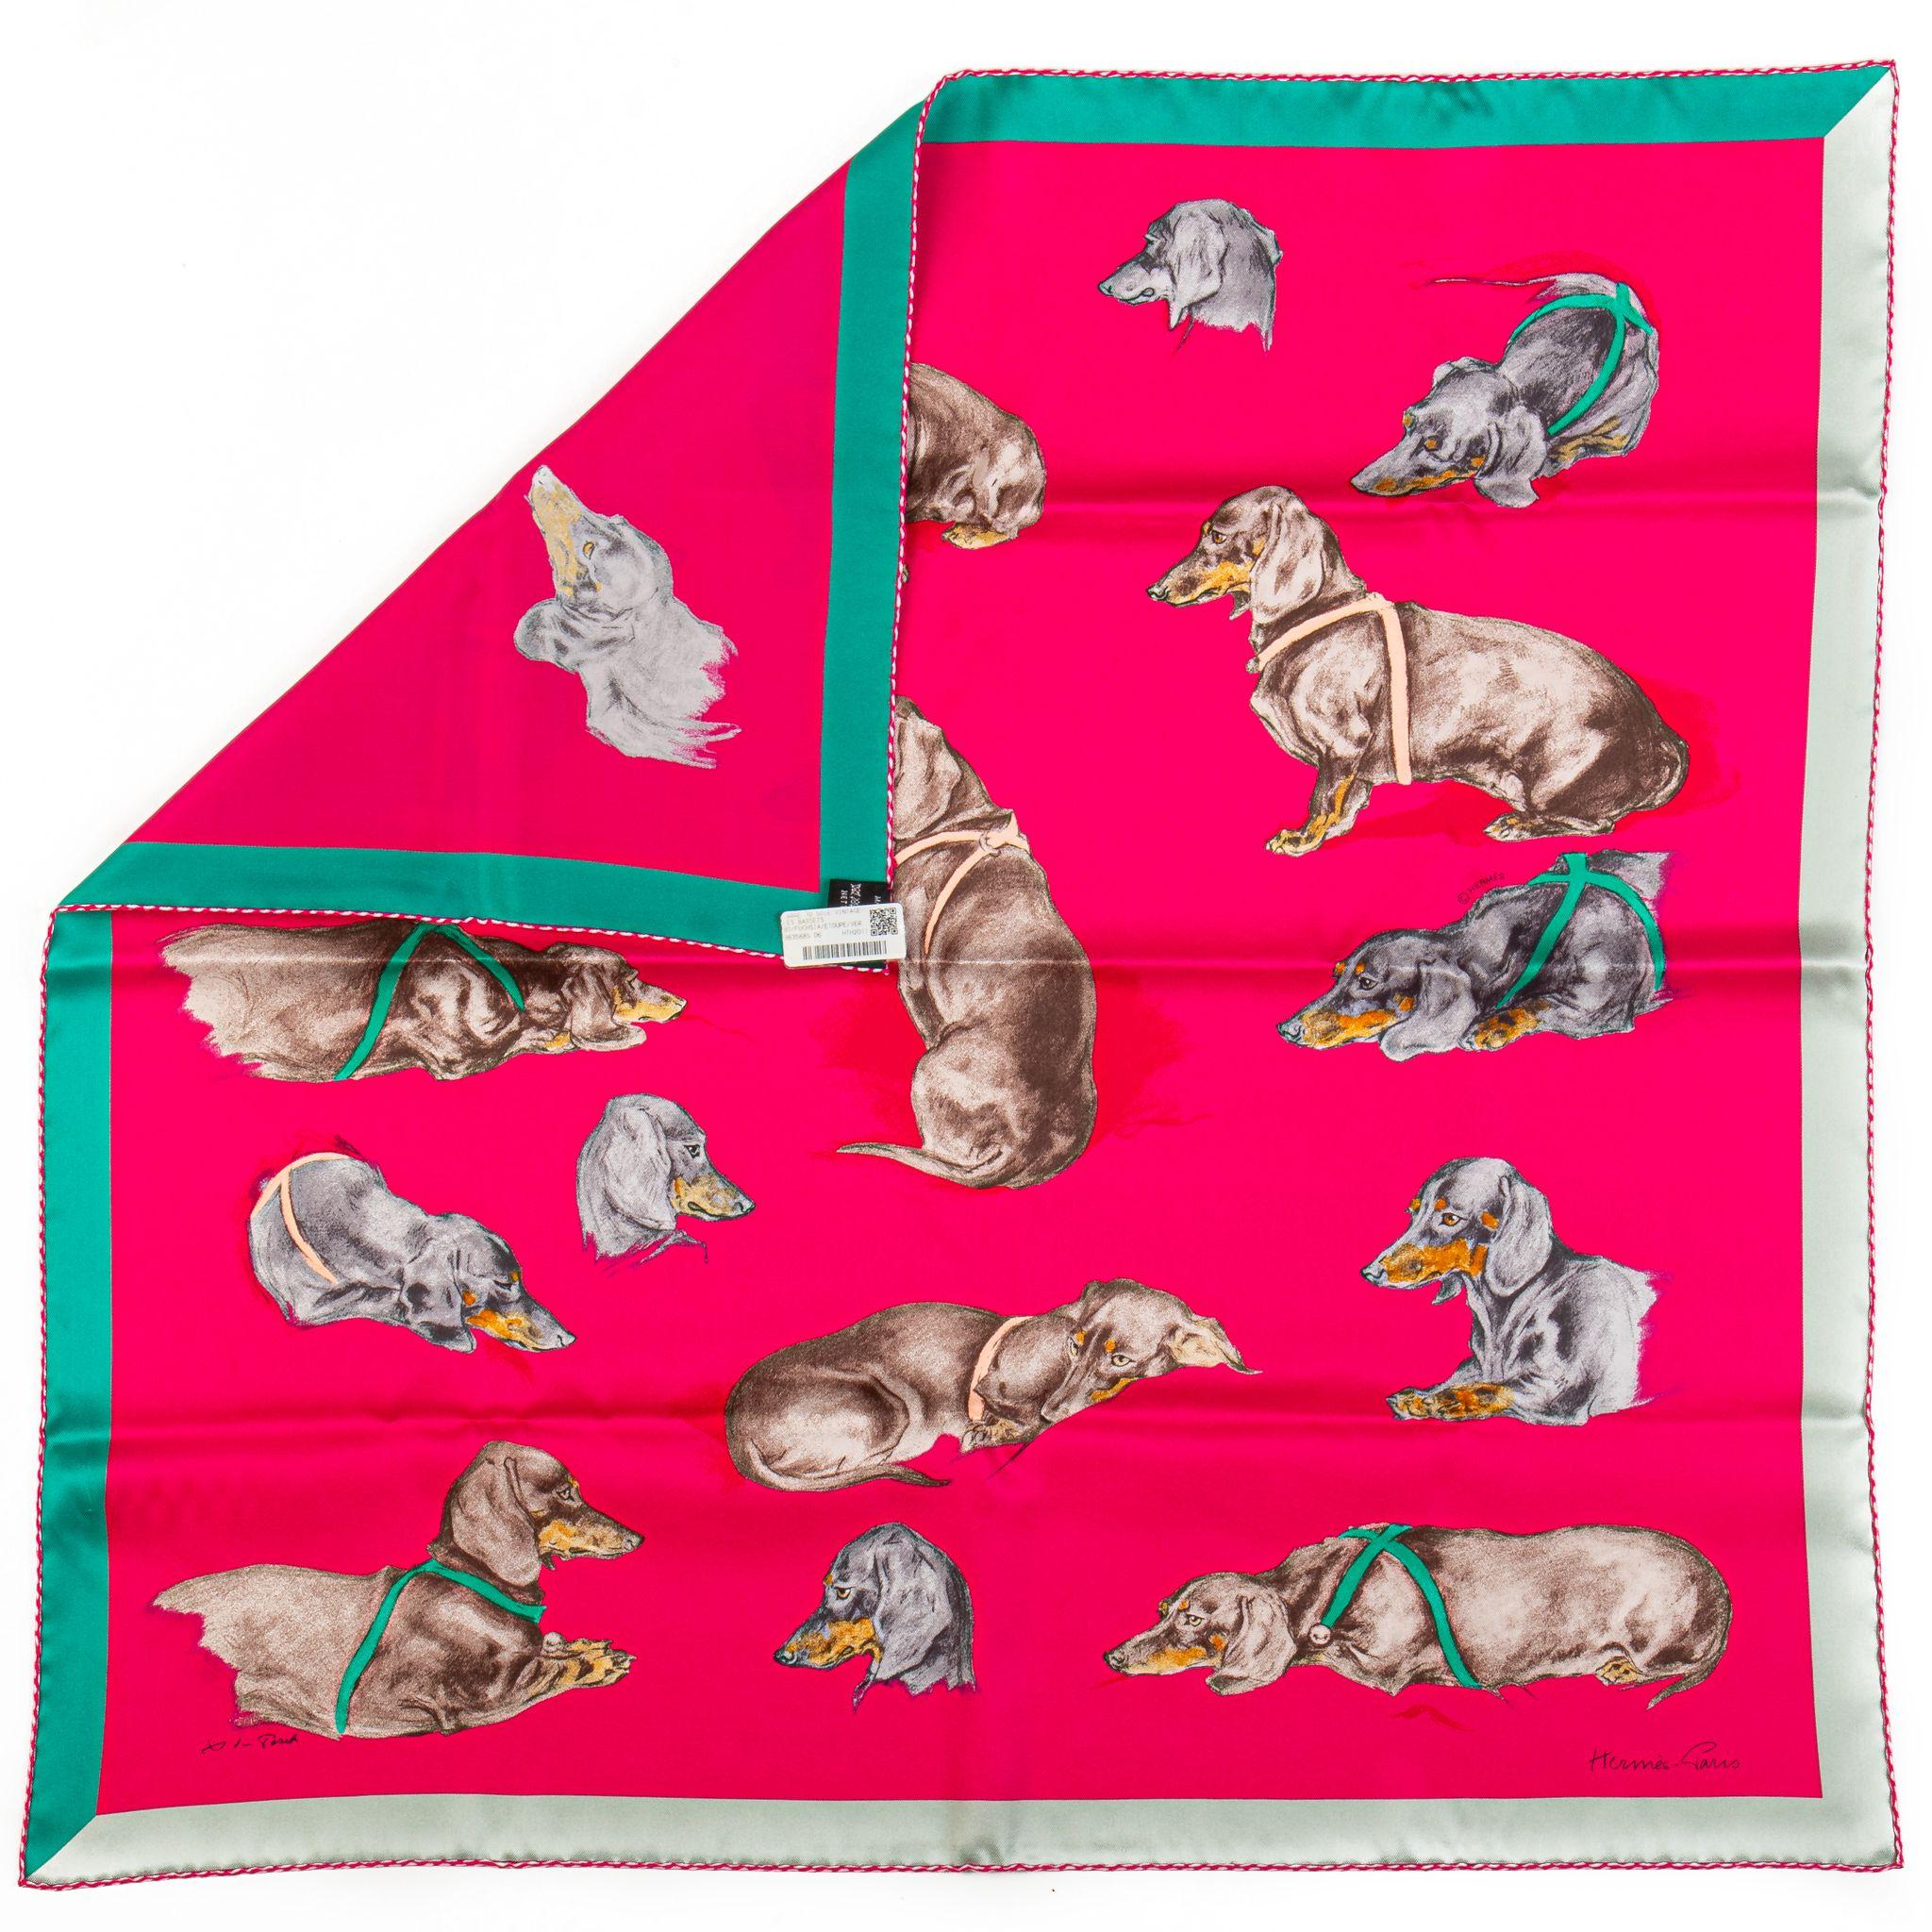 Hermès rare and collectible Les Bassets Alemands silk scarf. Hand rolled edges. Comes with original box.